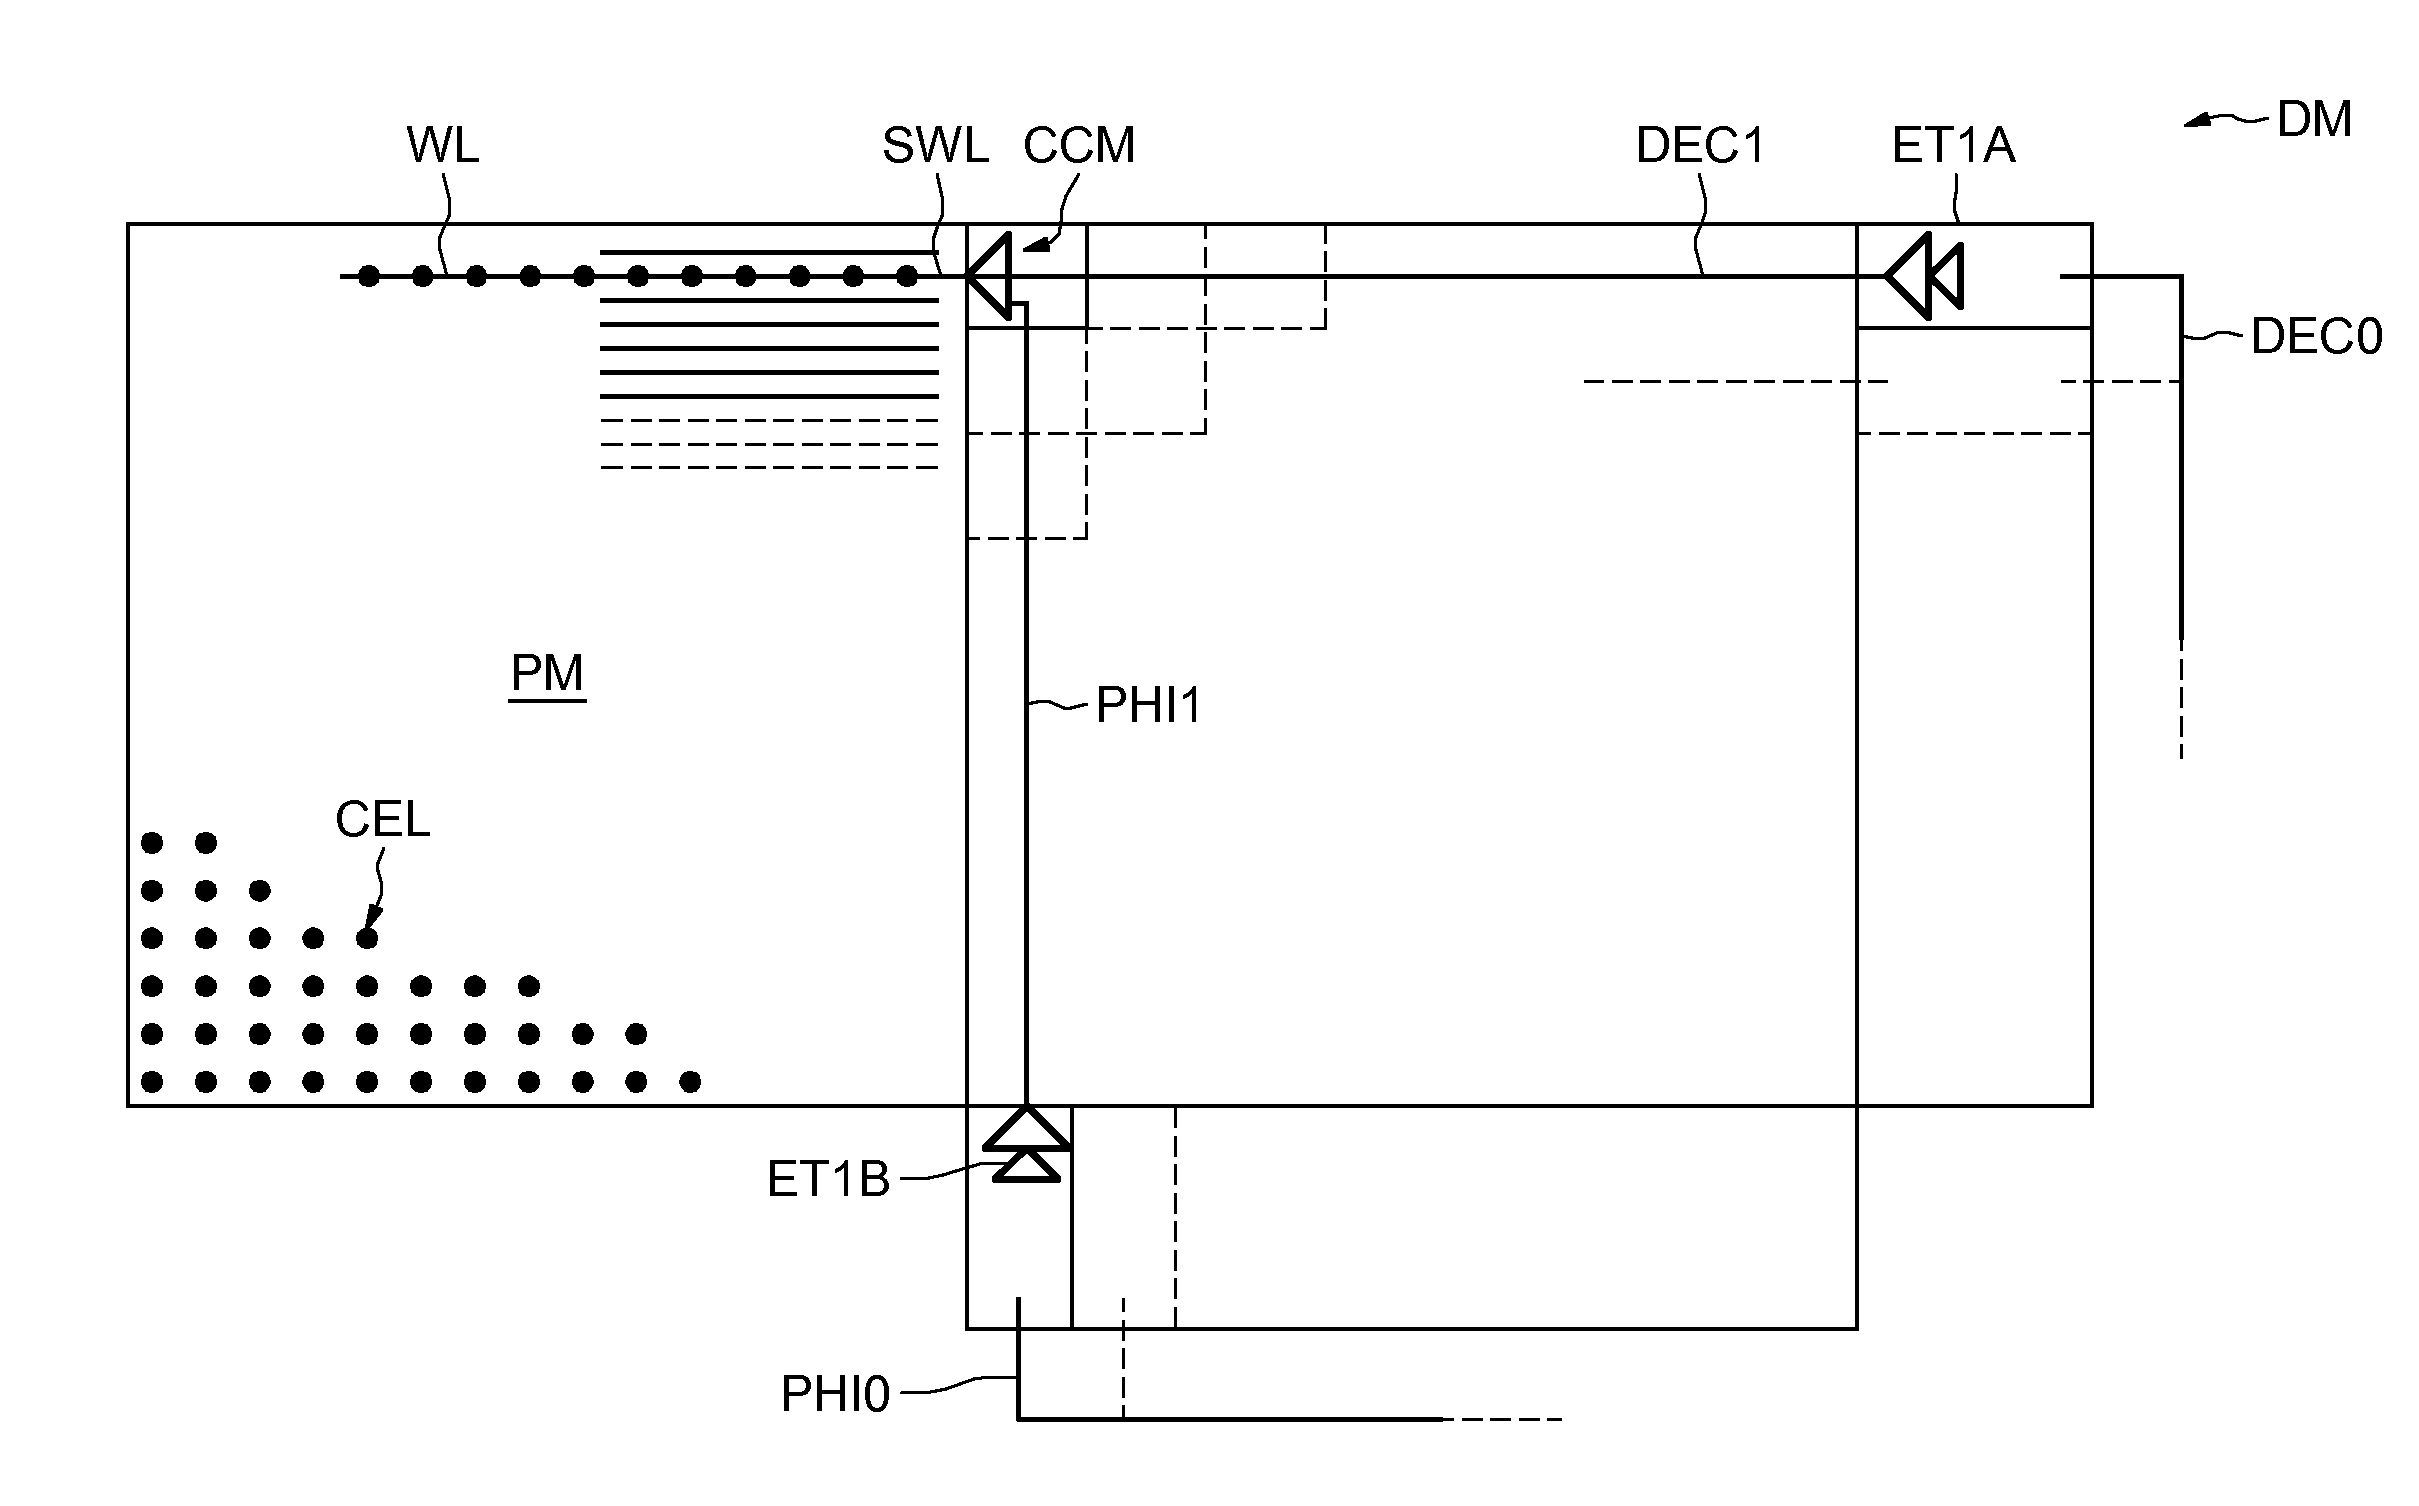 Dynamic random access memory device with improved control circuitry for the word lines